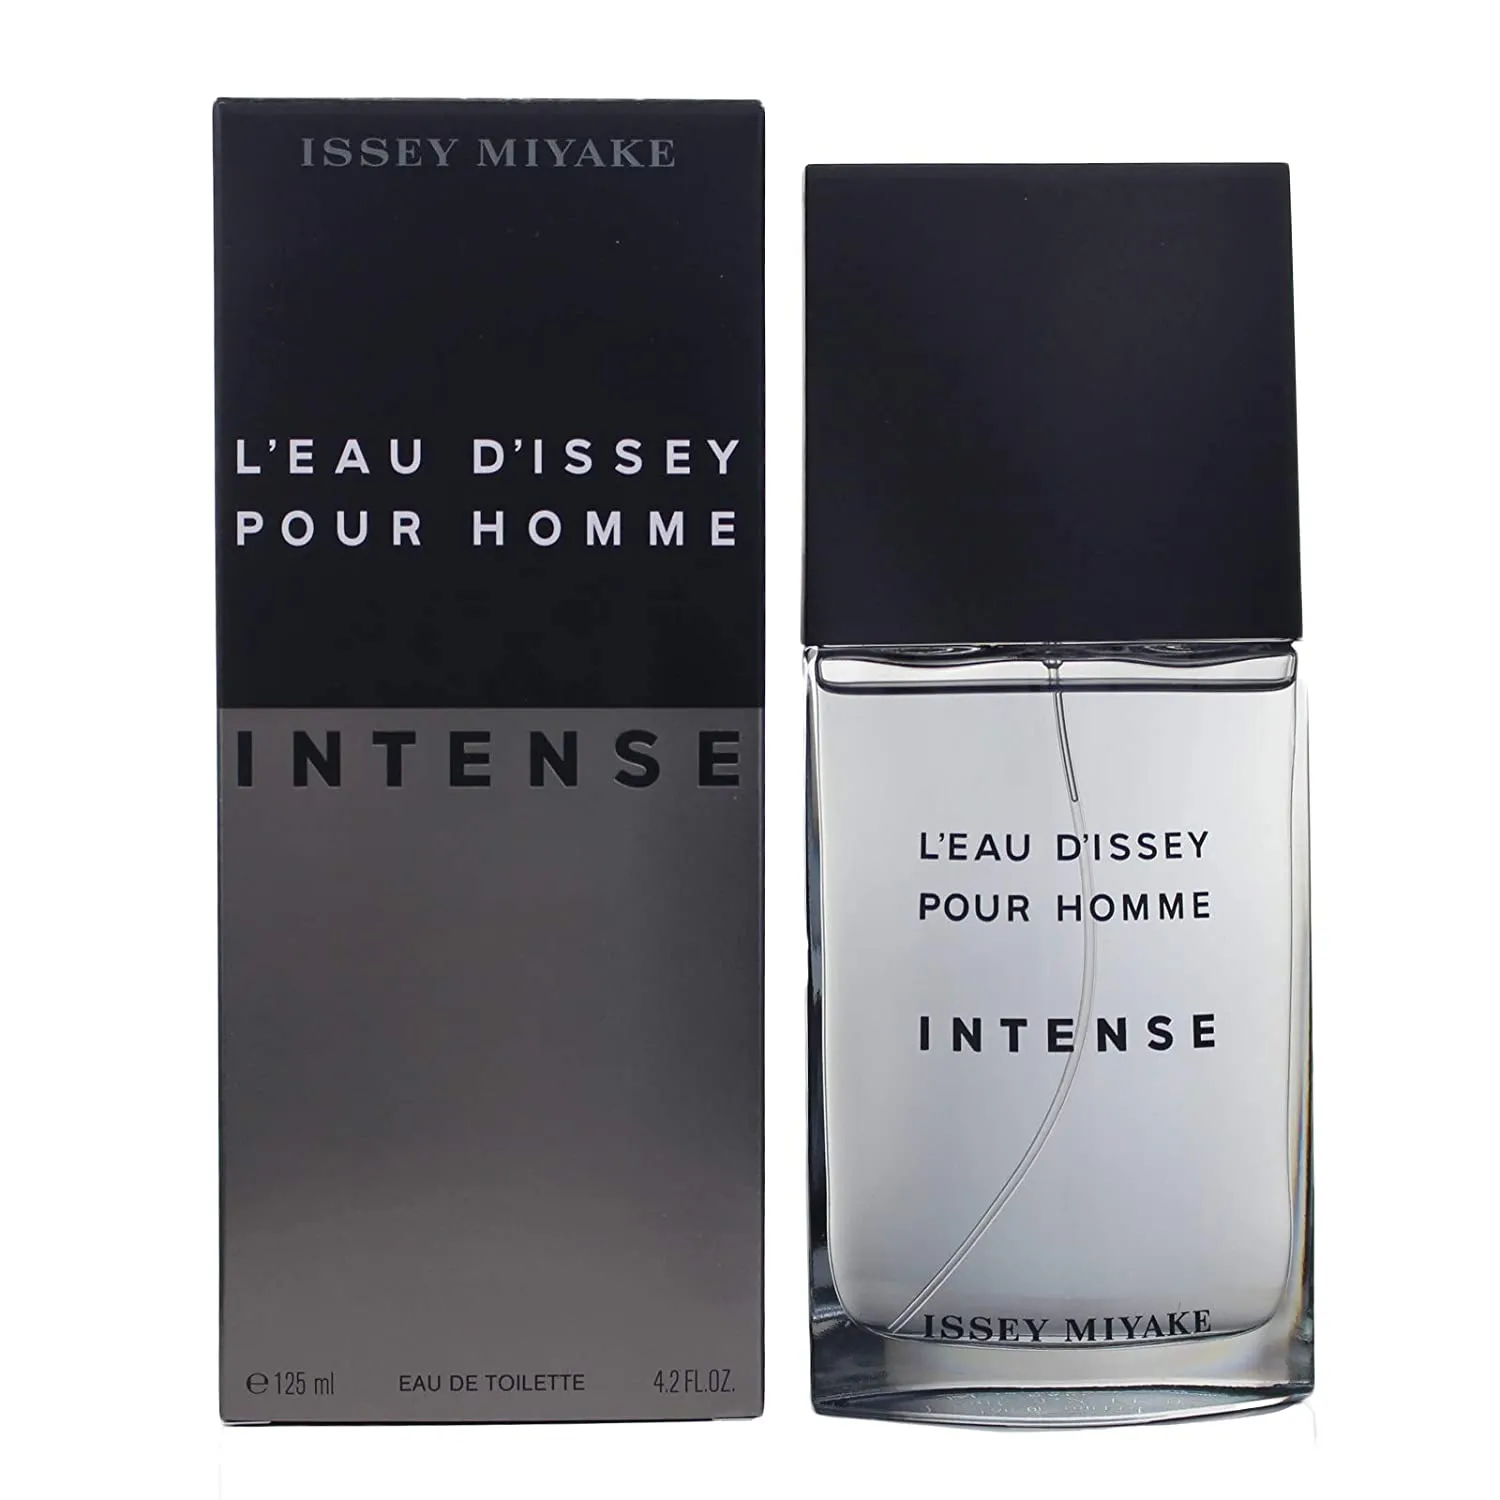 Issey Miyake L'Eau d'Issey Pour Homme Intense, 4.2 oz